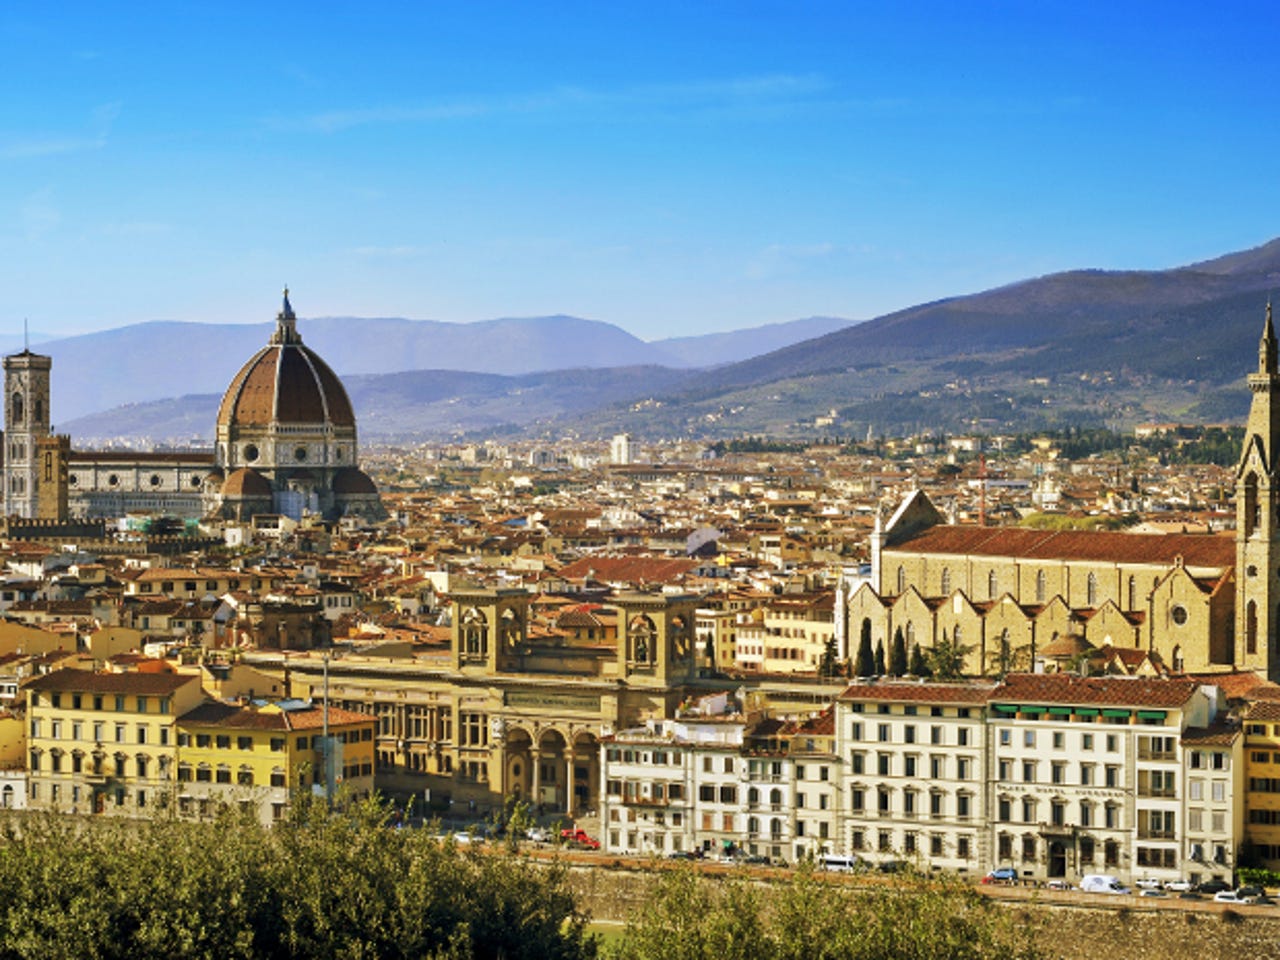 Florence, the capital of Tuscany